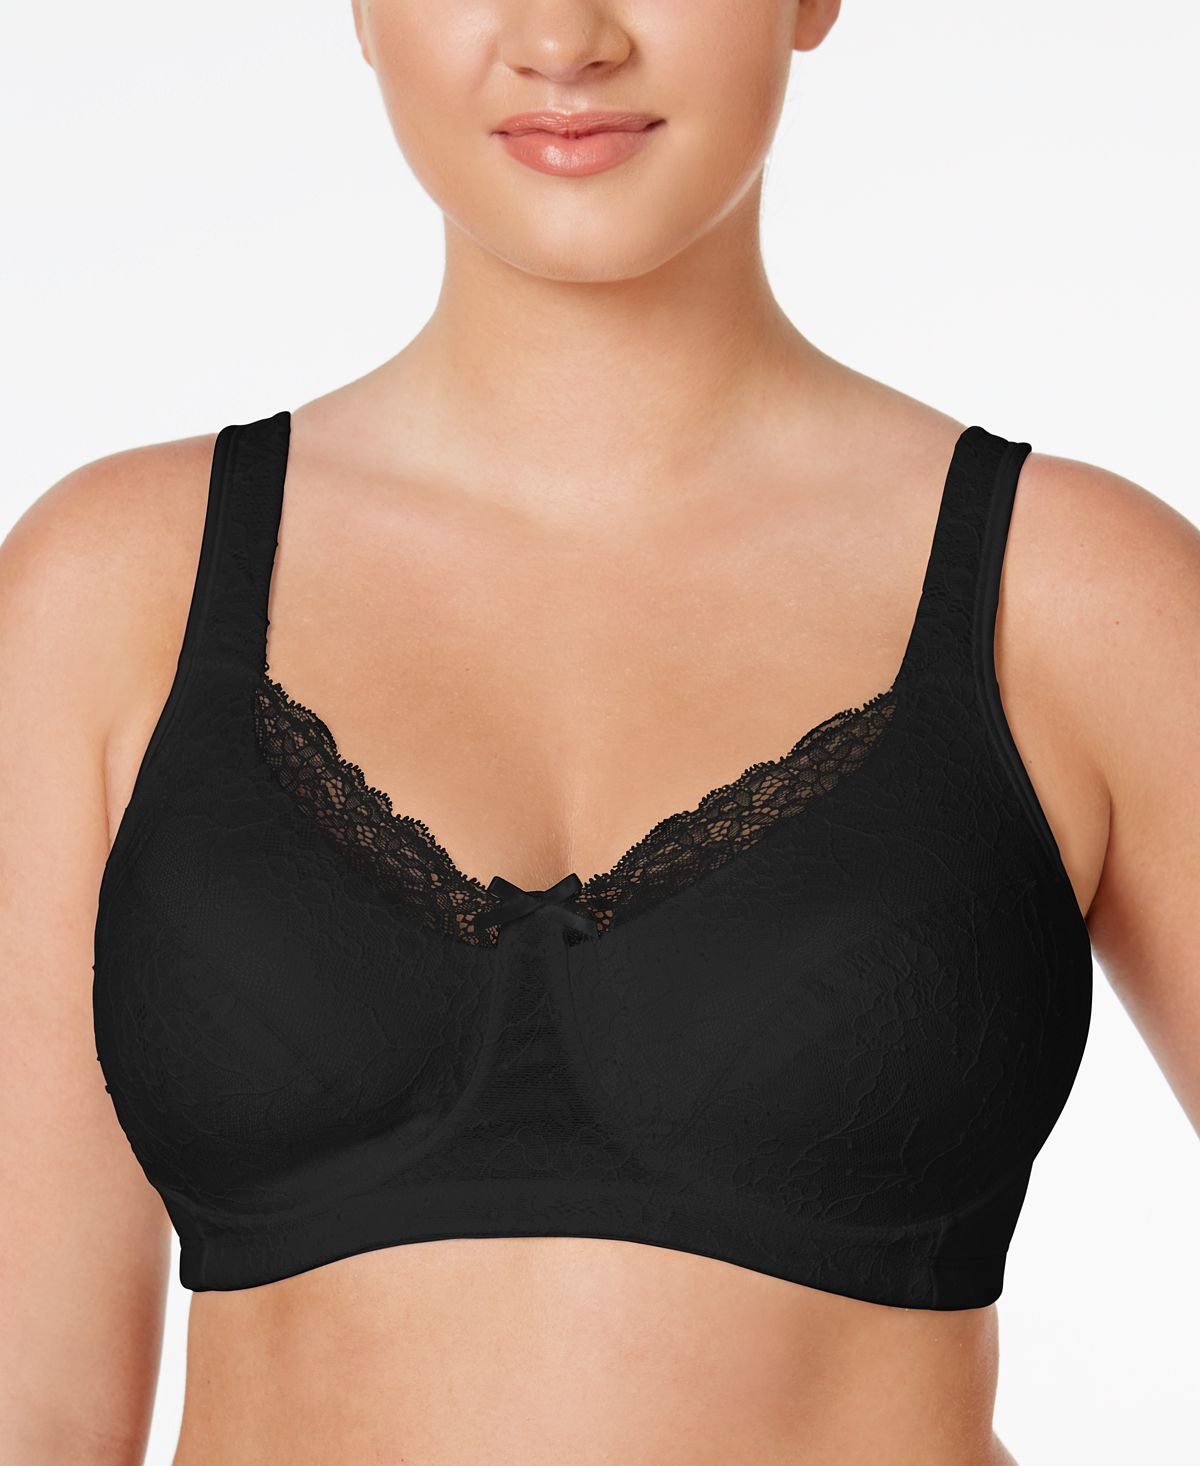 Playtex 18 Hour Lace-Cup Wireless Bra